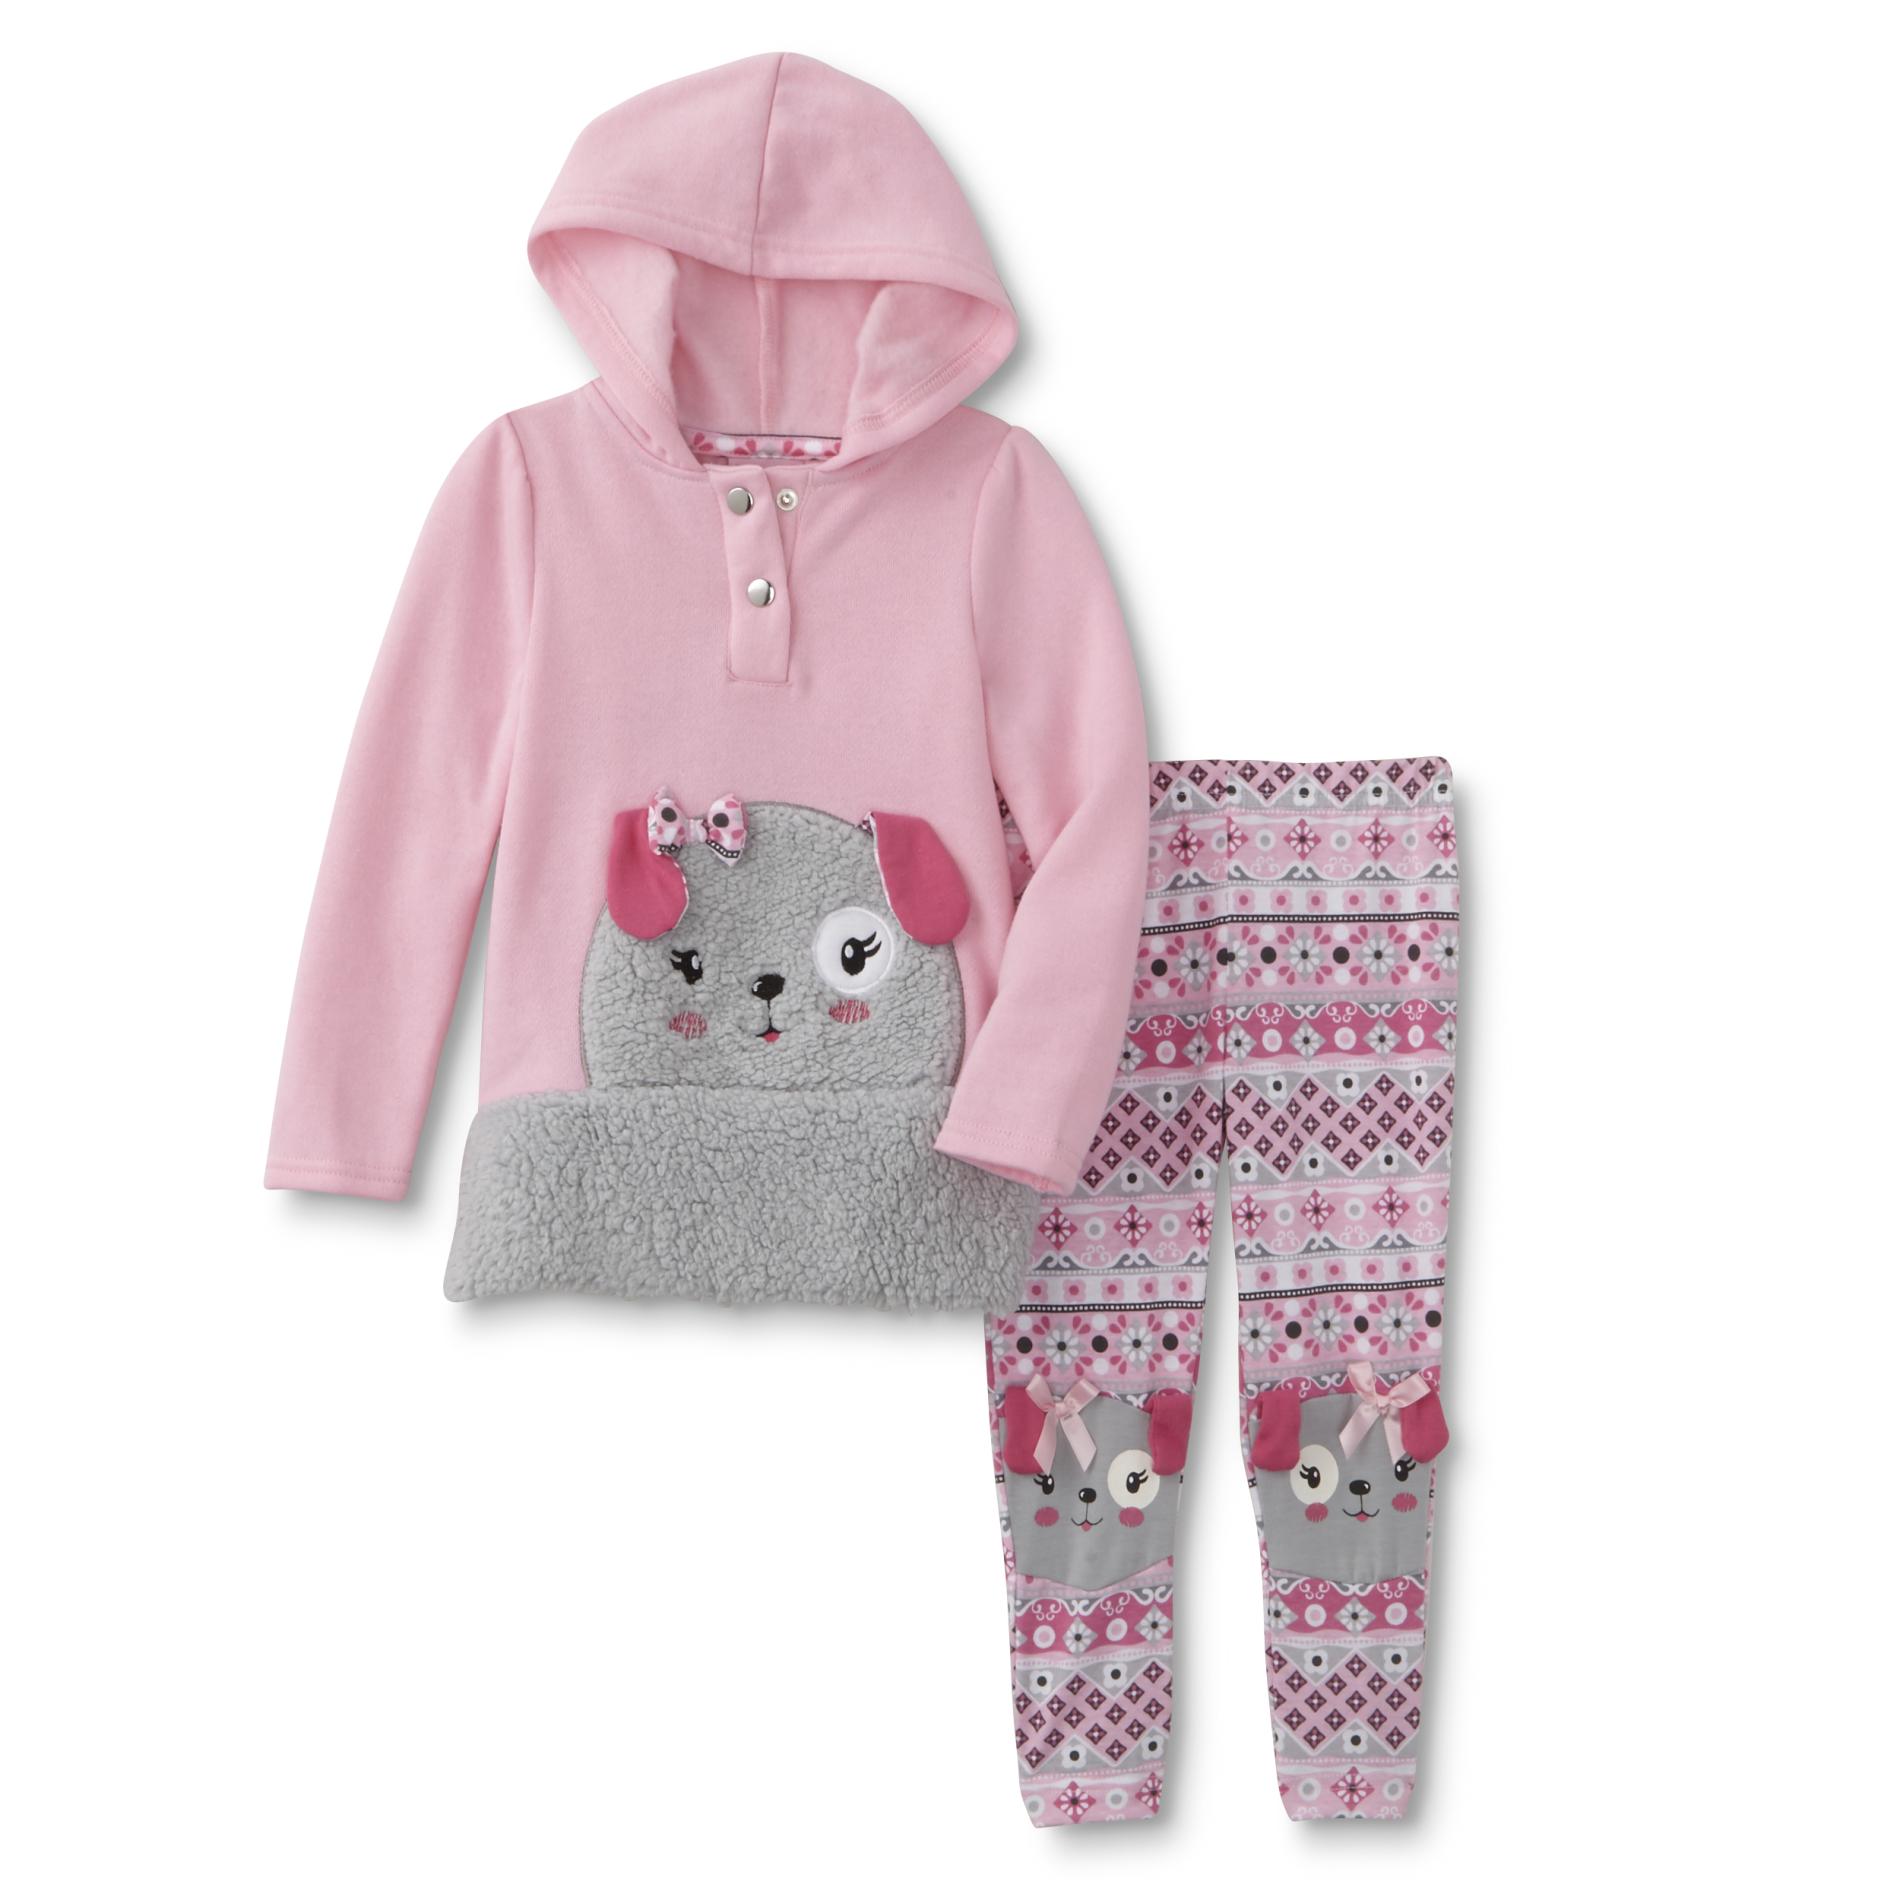 Young Hearts Infant & Toddler Girls' Hooded Sweater & Leggings - Dog